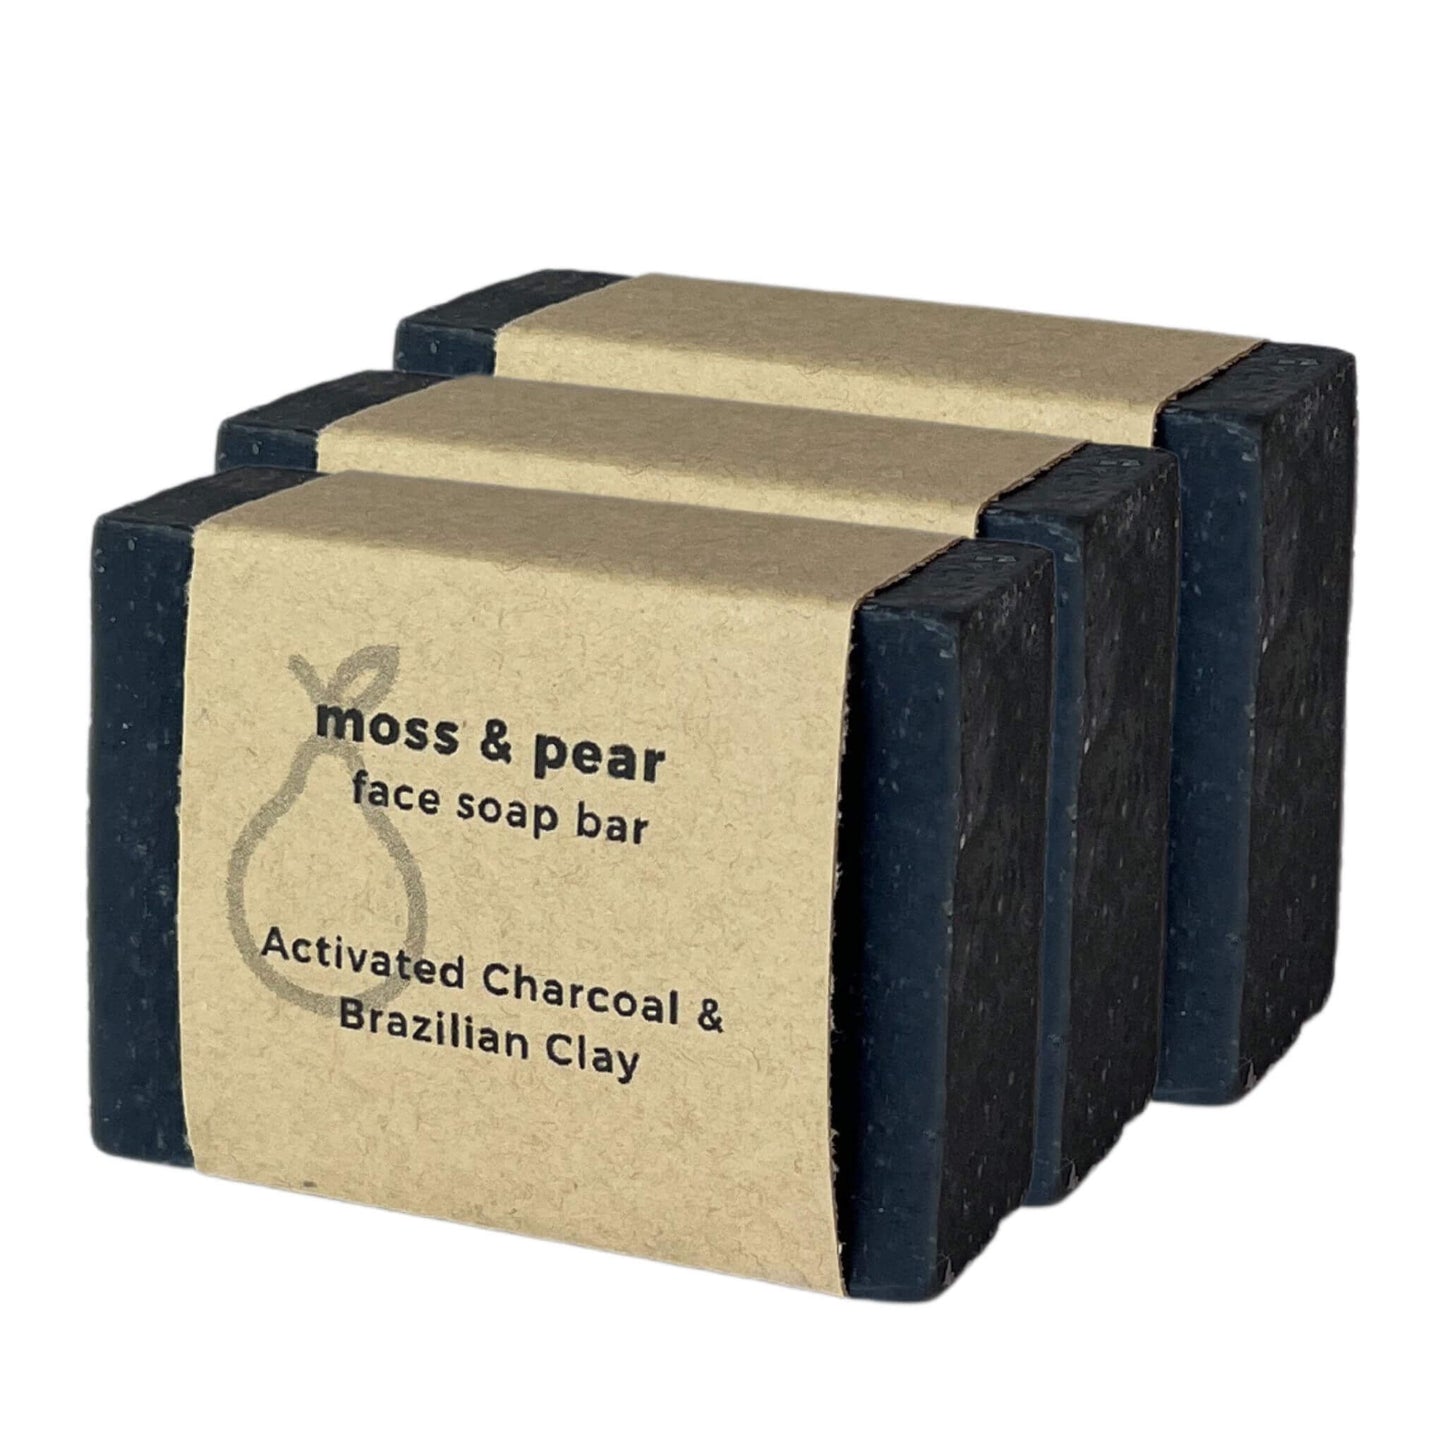 Face Soap Bar Activated Charcoal & Brazilian Clay with label 3 bars